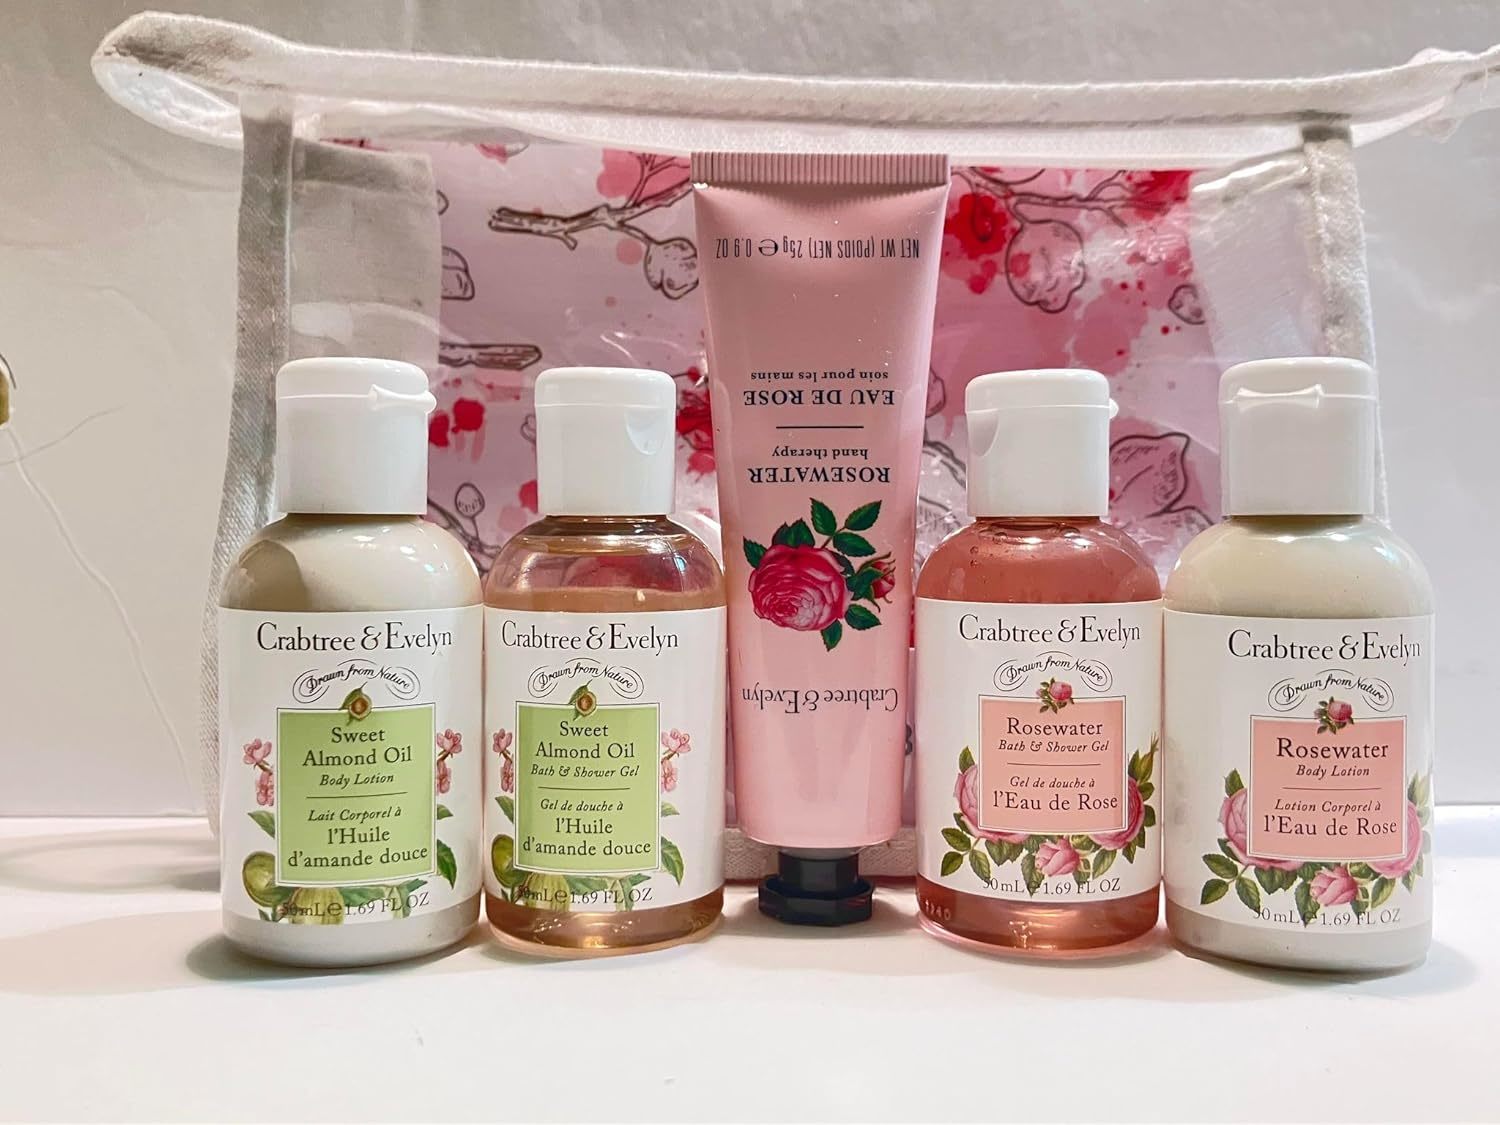 Crabtree & Evelyn Rosewater Sweet Almond Travel Set - $61.99